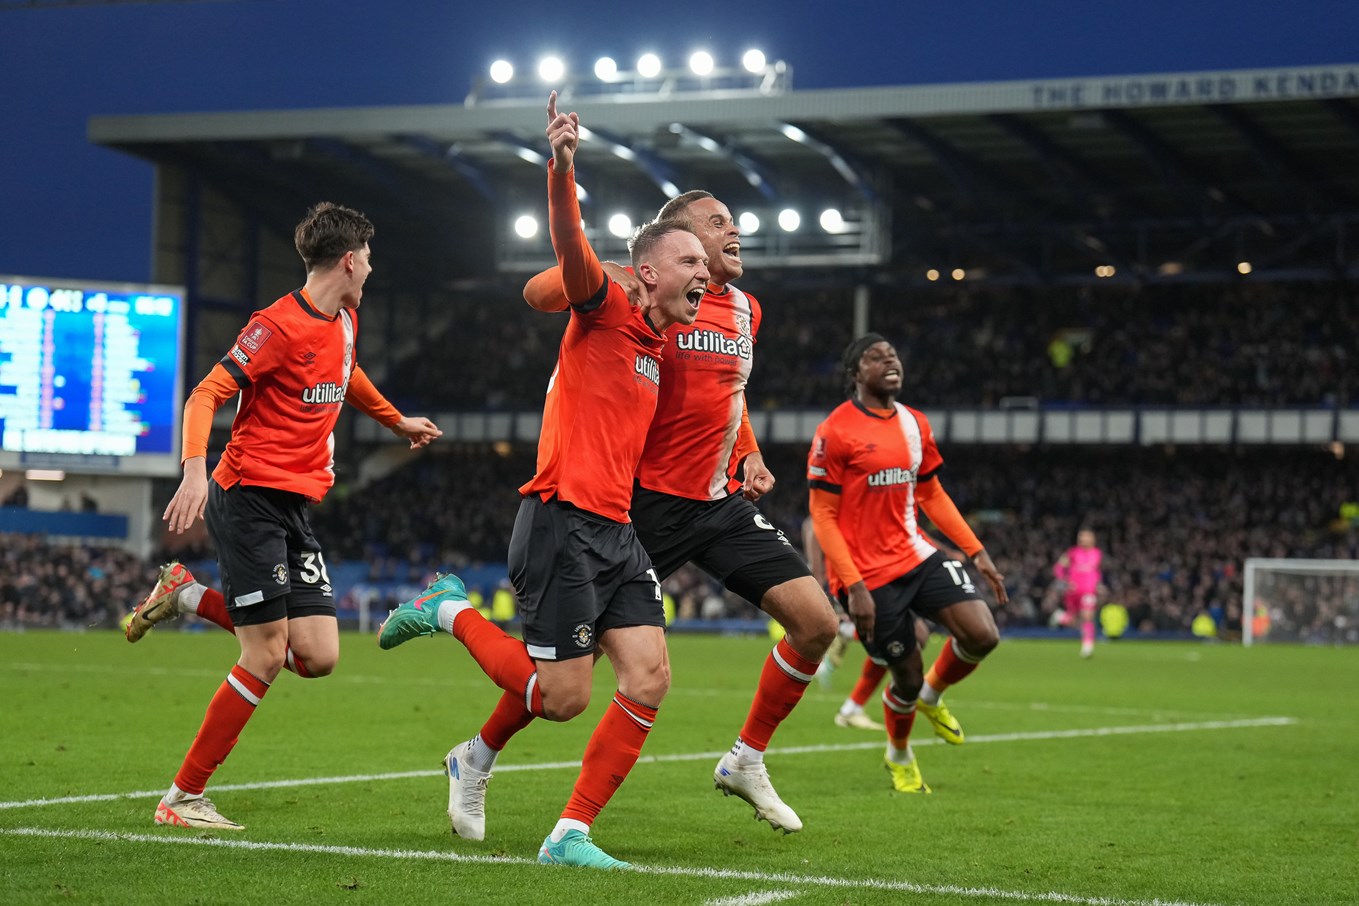 Cauley Woodrow celebrating his winner at Everton with his teammates.